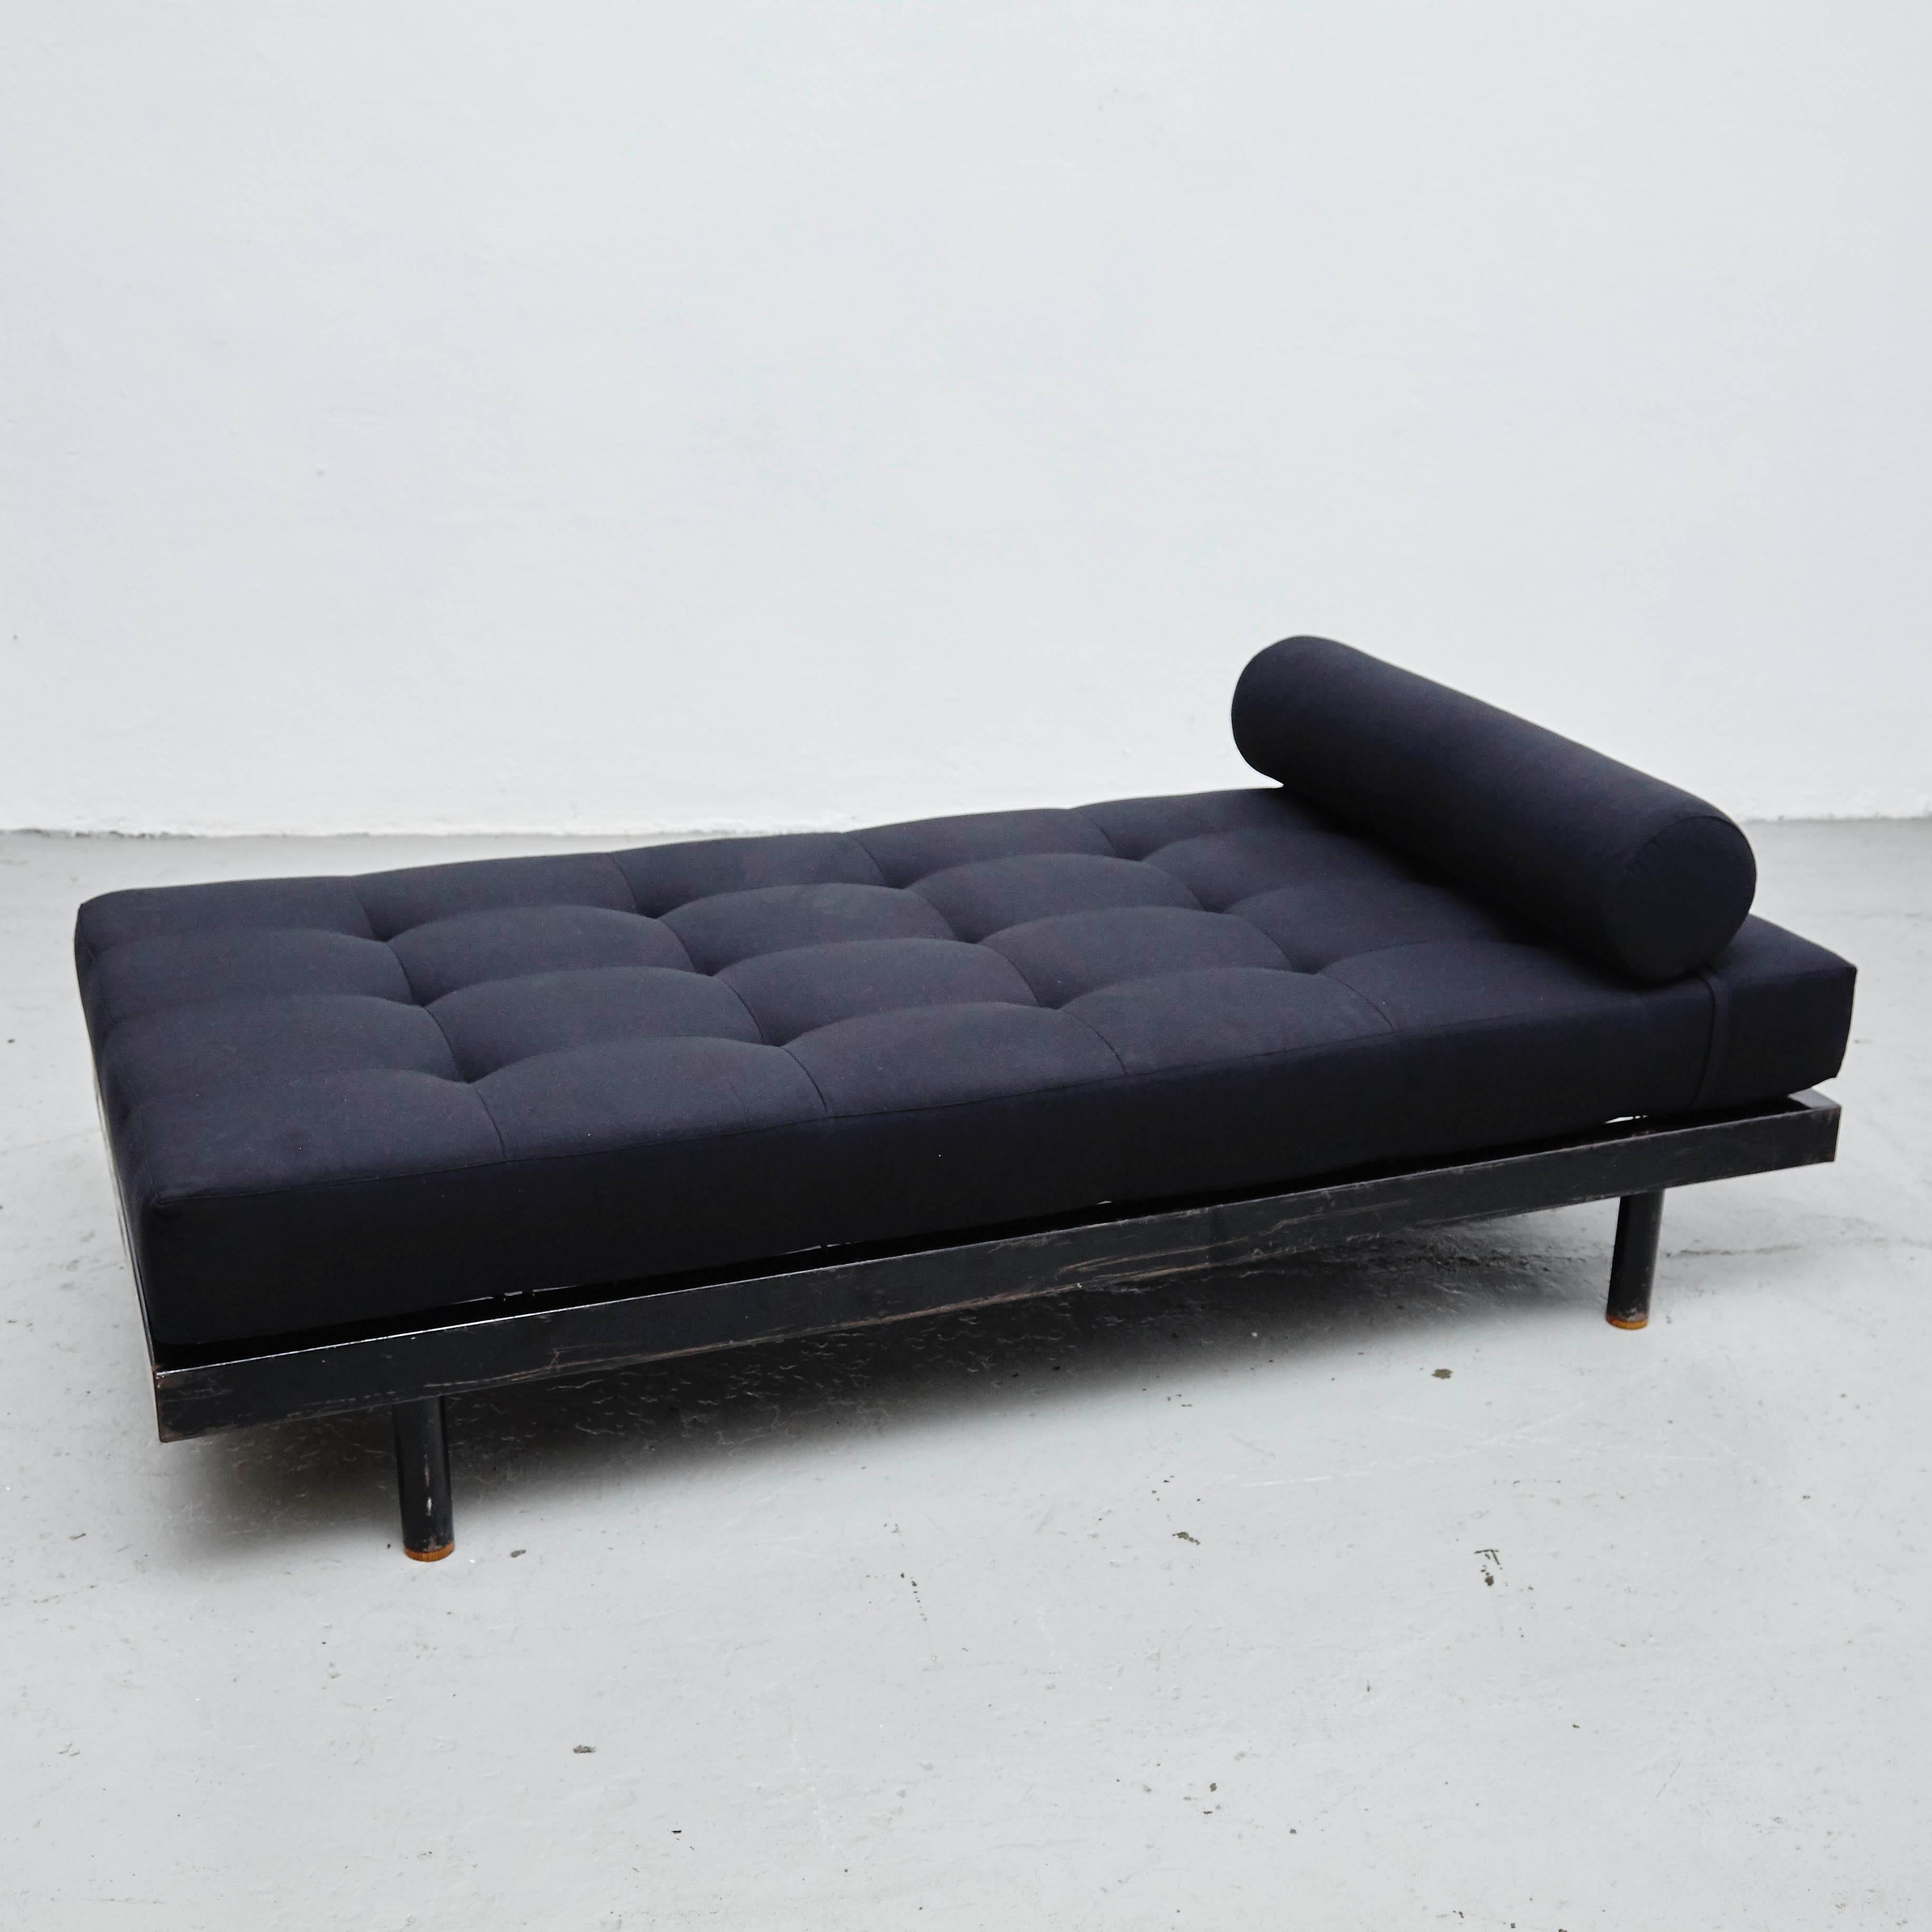 S.C.A.L. daybed designed by Jean Prouve.
Manufactured by Ateliers Prouve, France, circa 1950.
Metal frame, wood, new upholstery.

In good original condition, with minor wear consistent with age and use, preserving a beautiful patina.

Jean